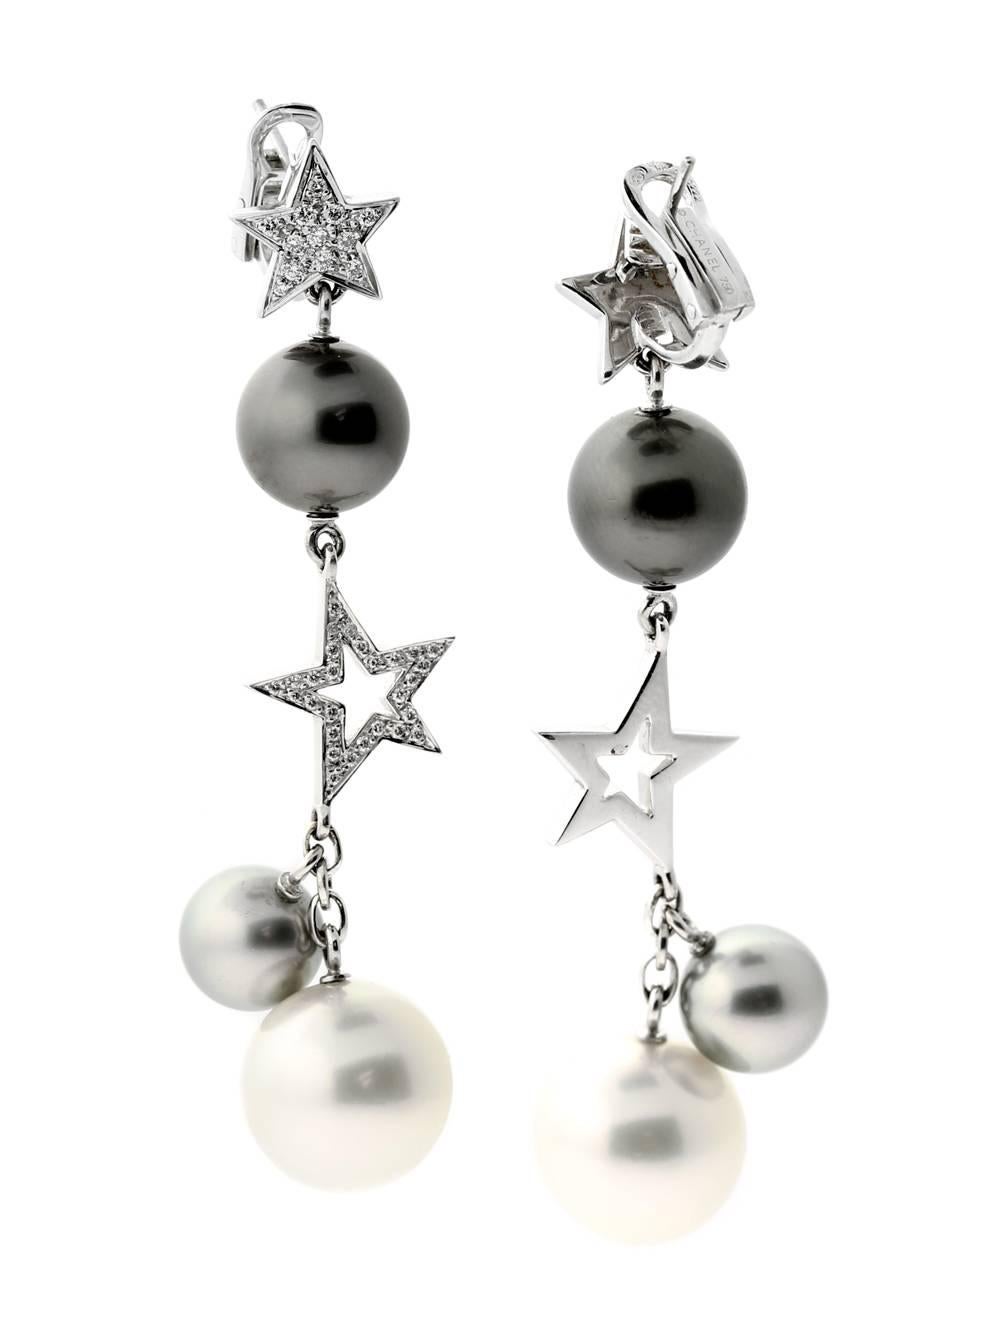 Chanel’s popular Comete Collection reaches starry new heights courtesy of these gorgeous pearls  and diamond earrings ranging from 9.5mm to 14mm in 18k white gold.

Inventory ID: 0000049